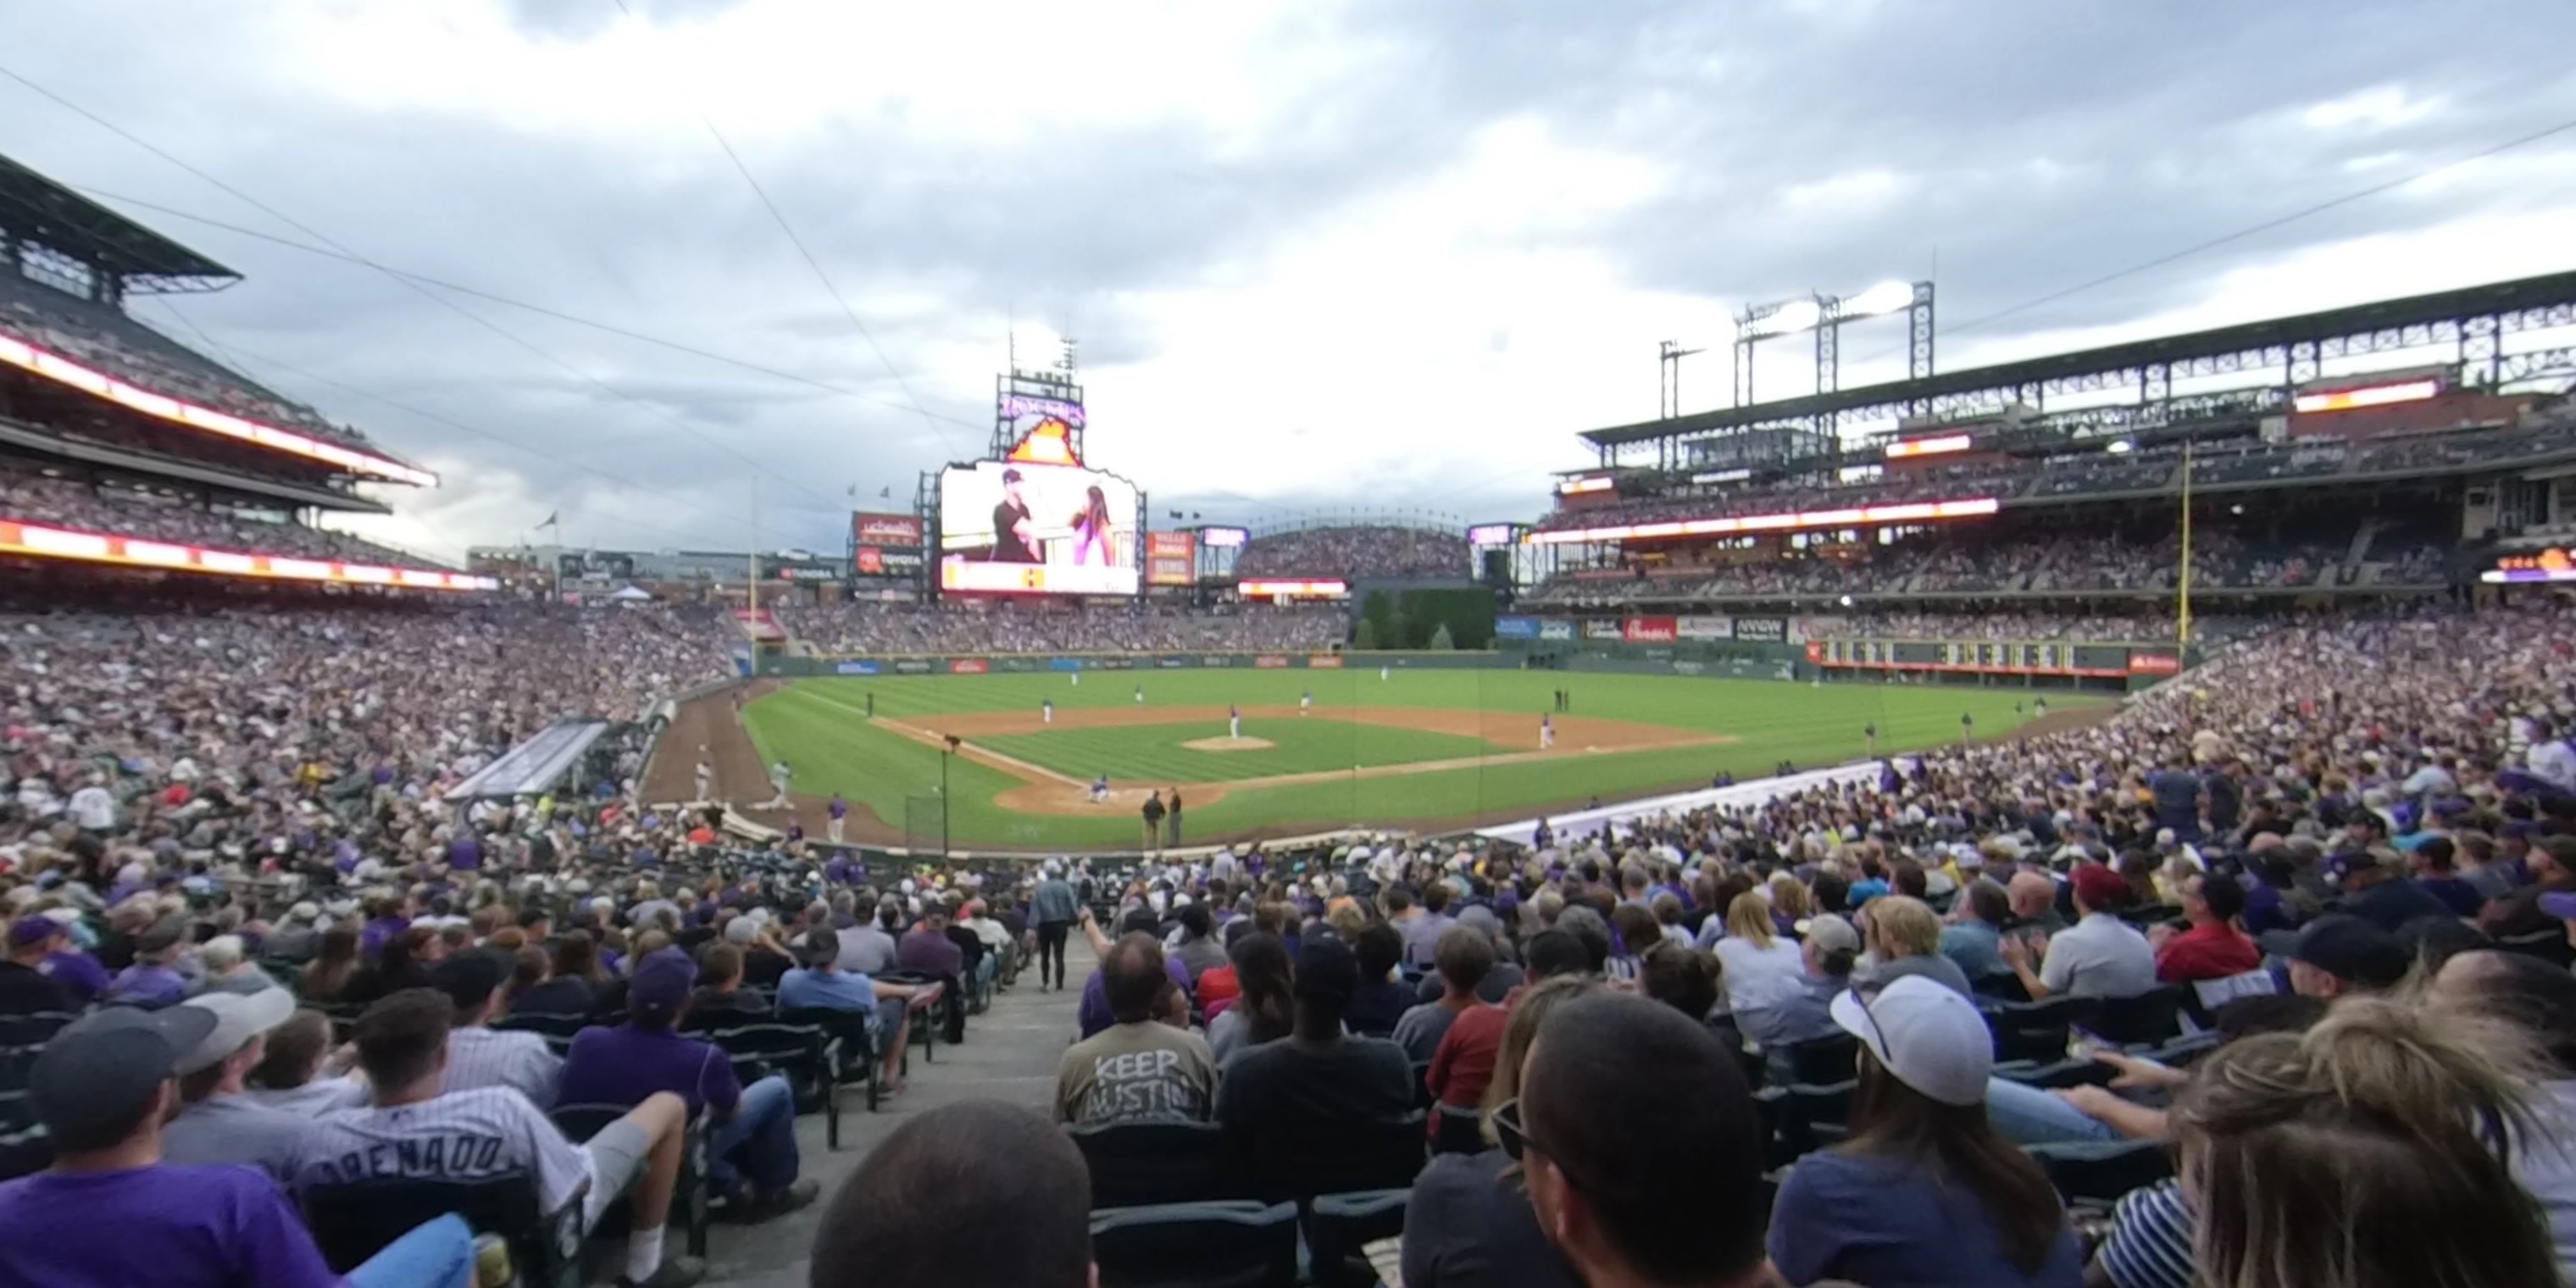 section 128 panoramic seat view  - coors field